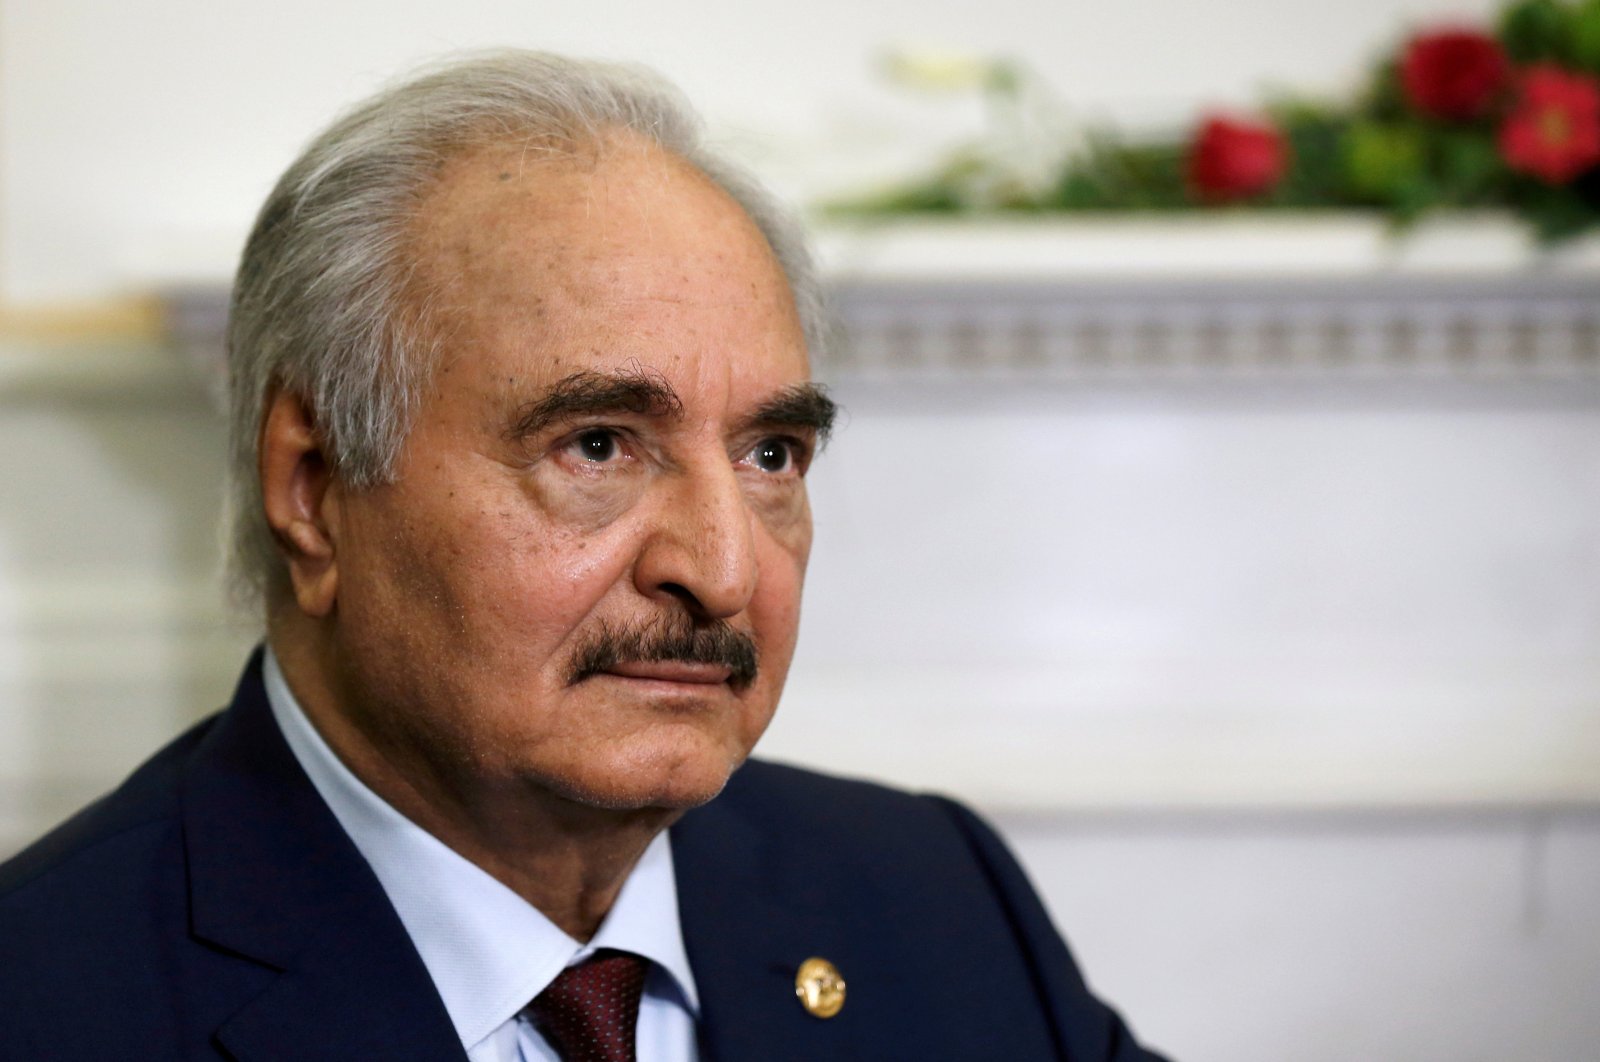 Renegade Gen. Khalifa Haftar meets Greek Foreign Minister Nikos Dendias (not pictured) at the Foreign Ministry in Athens, Greece, Jan. 17, 2020. (Reuters Photo)